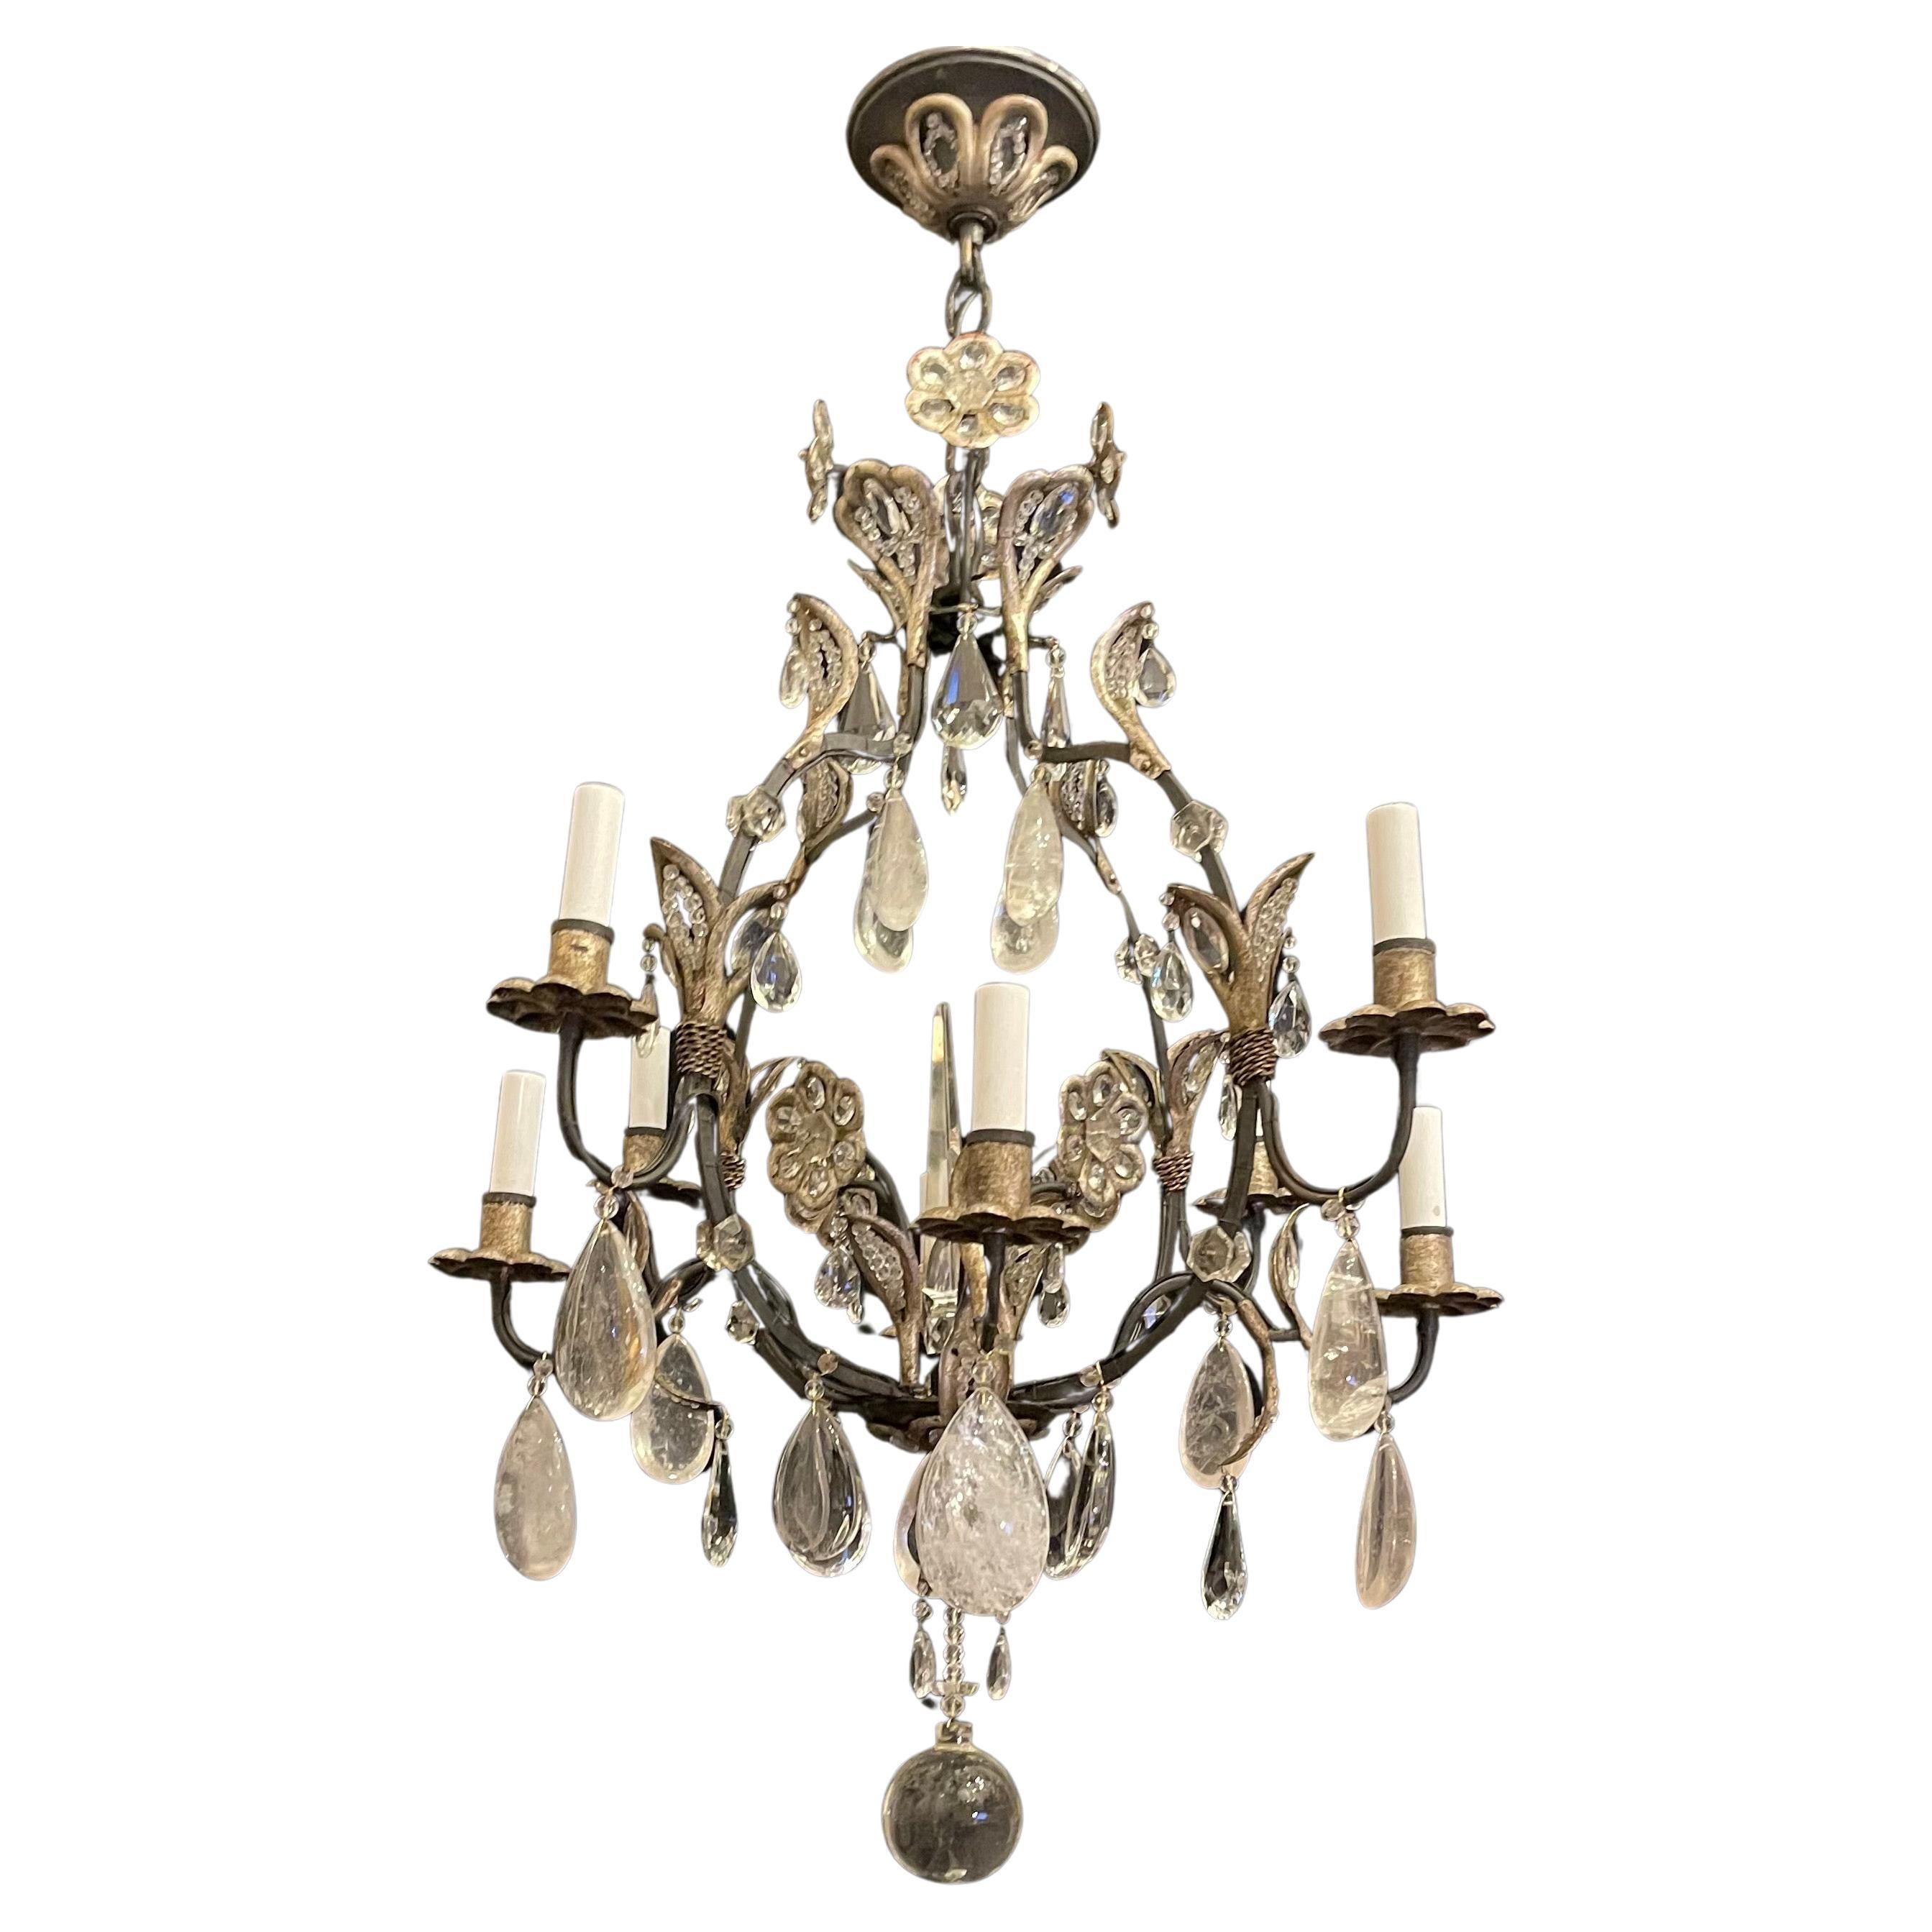 A Wonderful 8 Candelabra Light In The Manner Of Maison Baguès Style Iron & Silver Gilt With Rock Crystal And Crystal Drop Chandelier Having Flower Bouquet Accents Throughout.